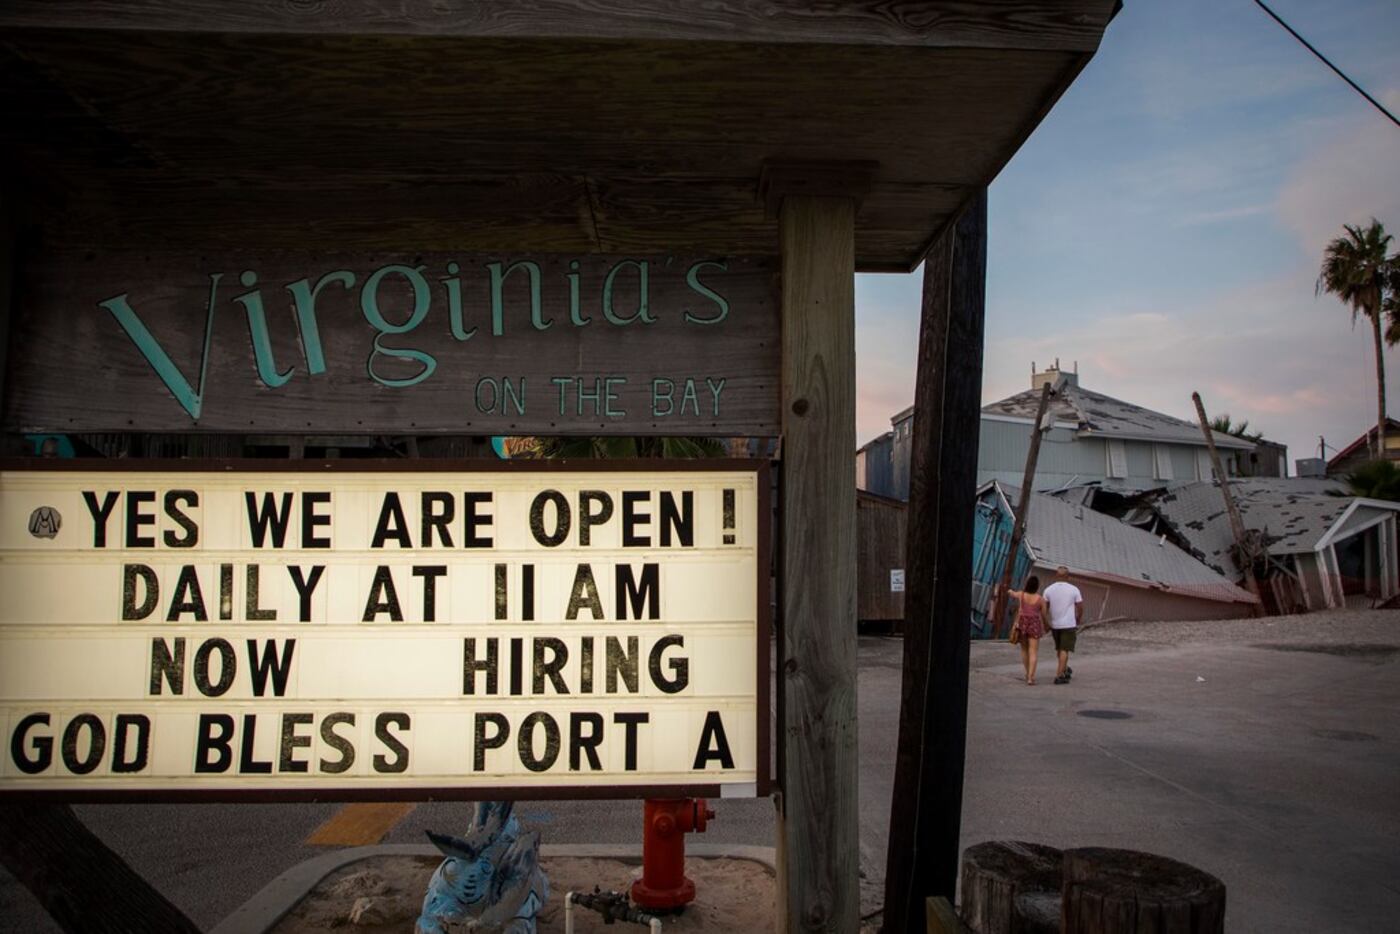 A sign at Virginia's On The Bay restaurant n Port Aransas advertises that the restaurant is...